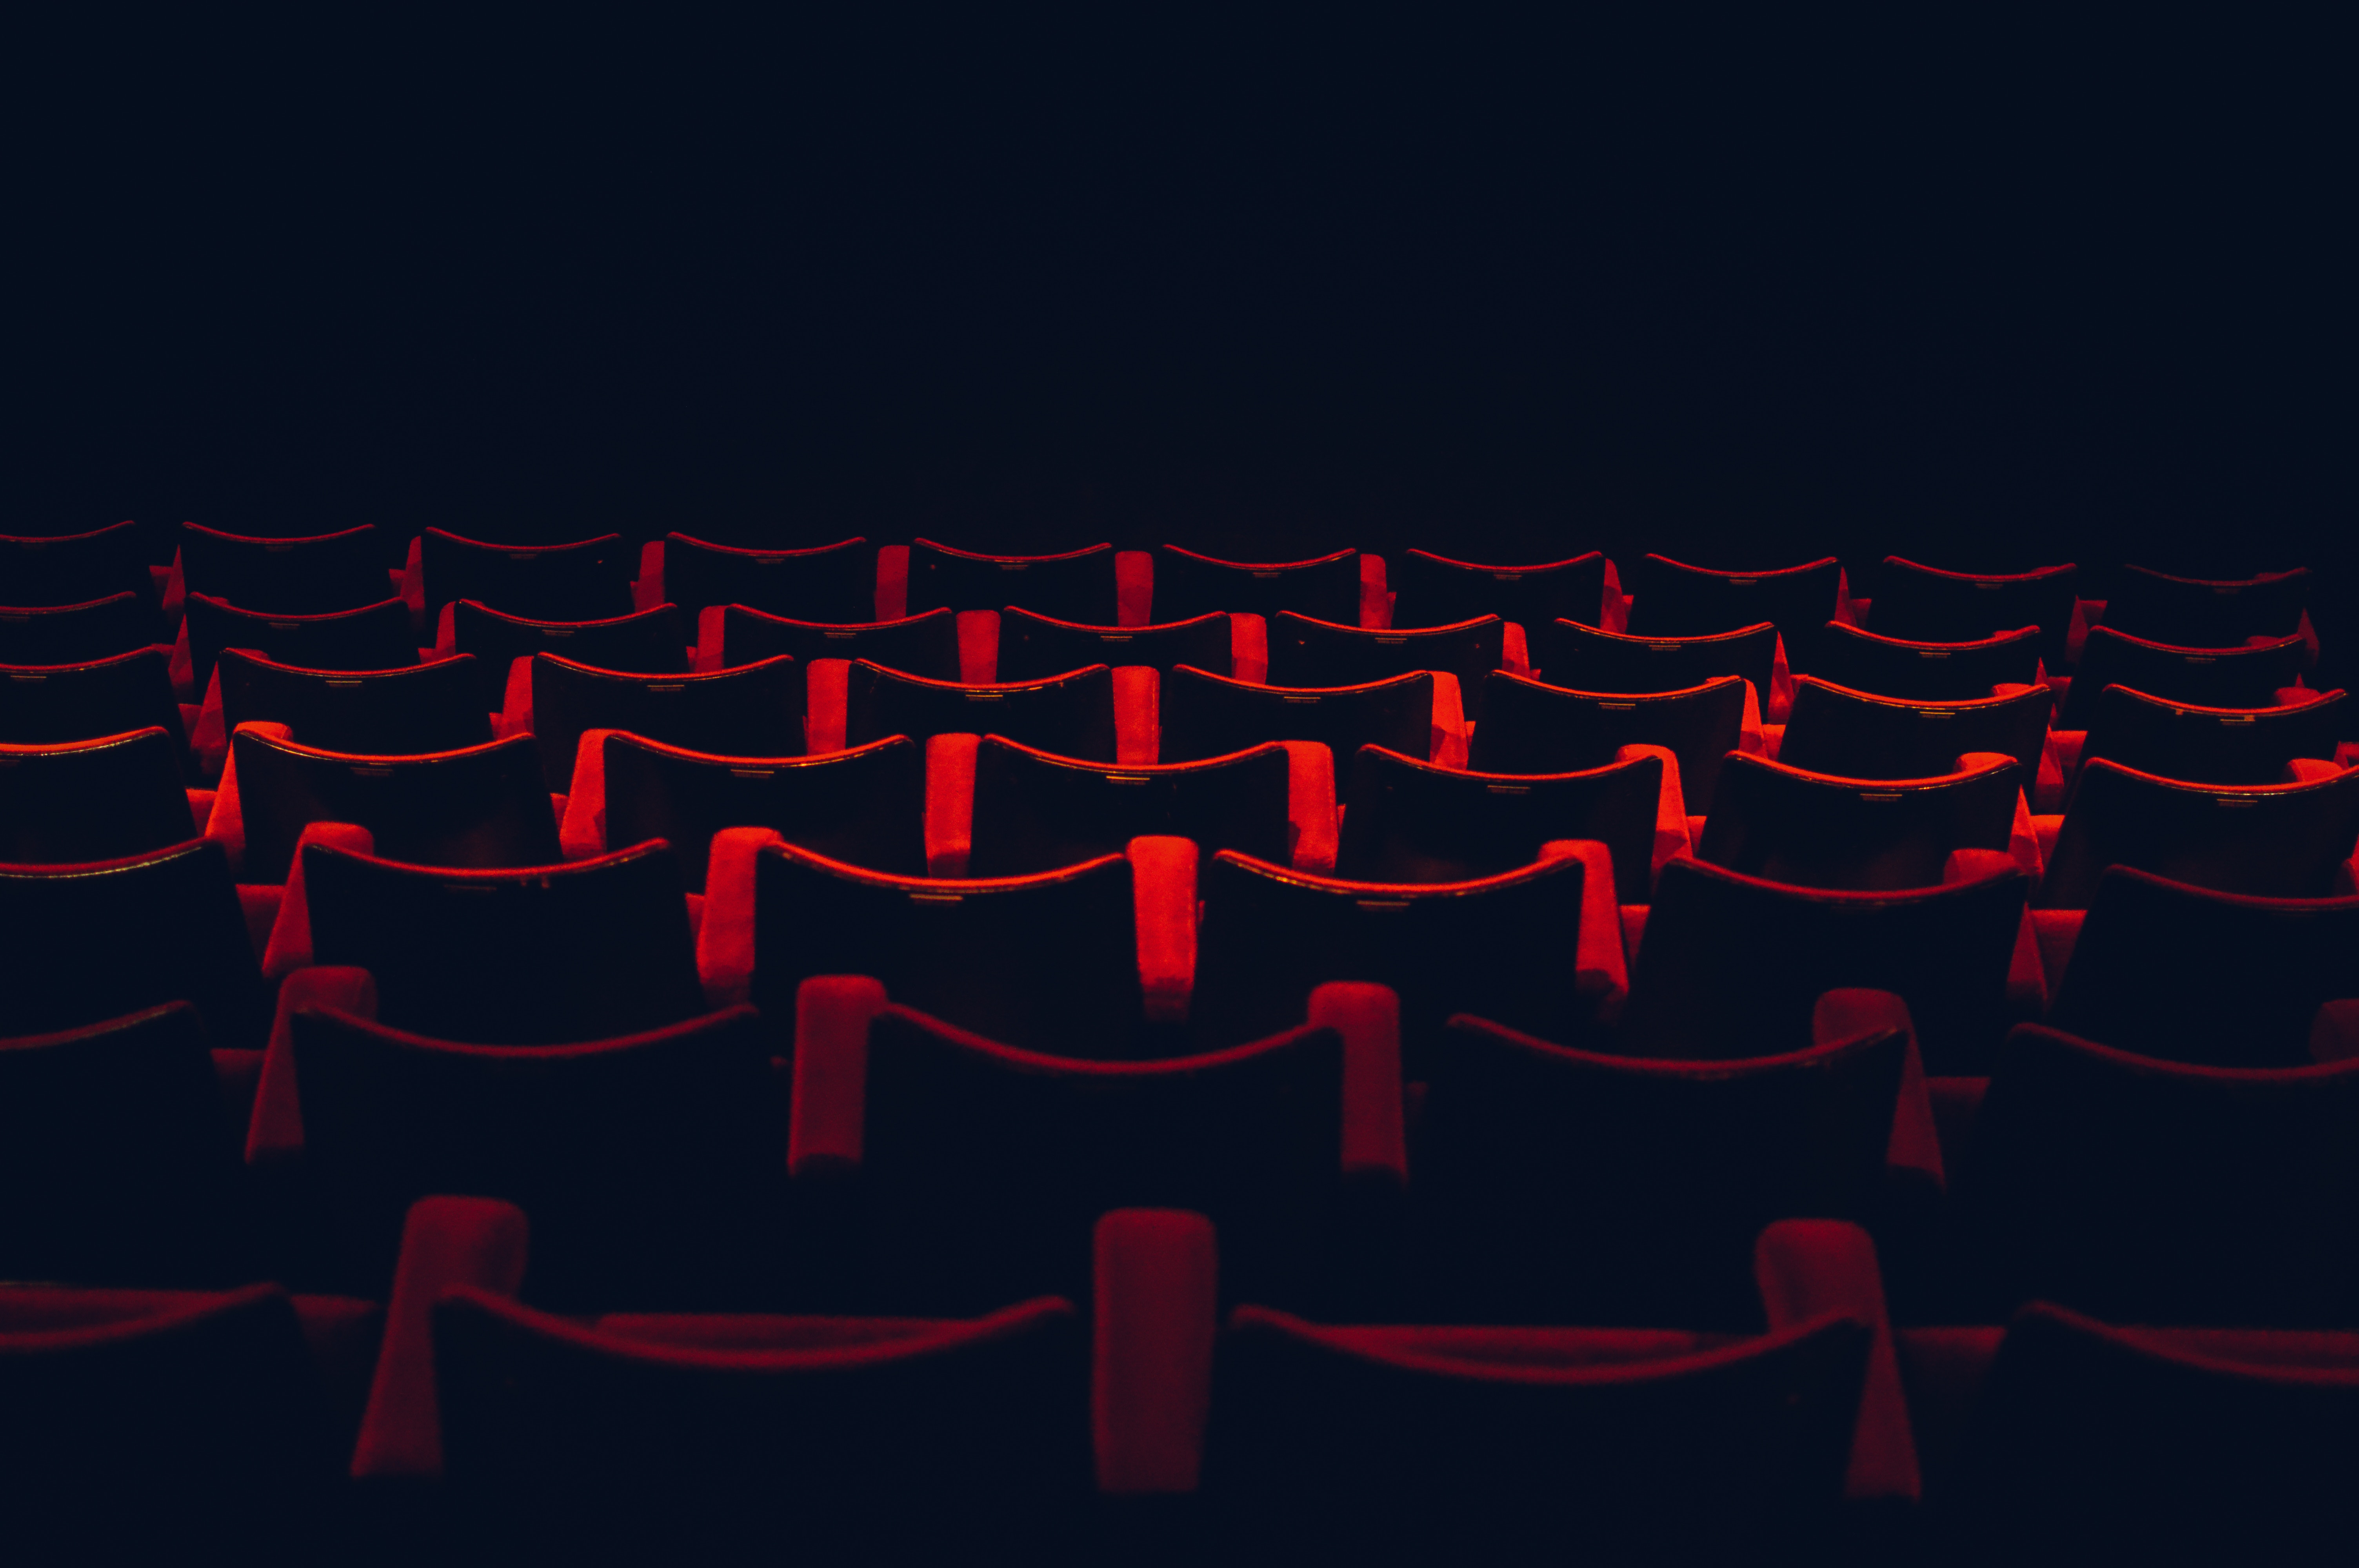 X dark room seat theater creative mons images cinema room velvet chairs red darkness sofa repetition cinema theatre room red chairs cinema seats chair dark seats movie seating repetitive